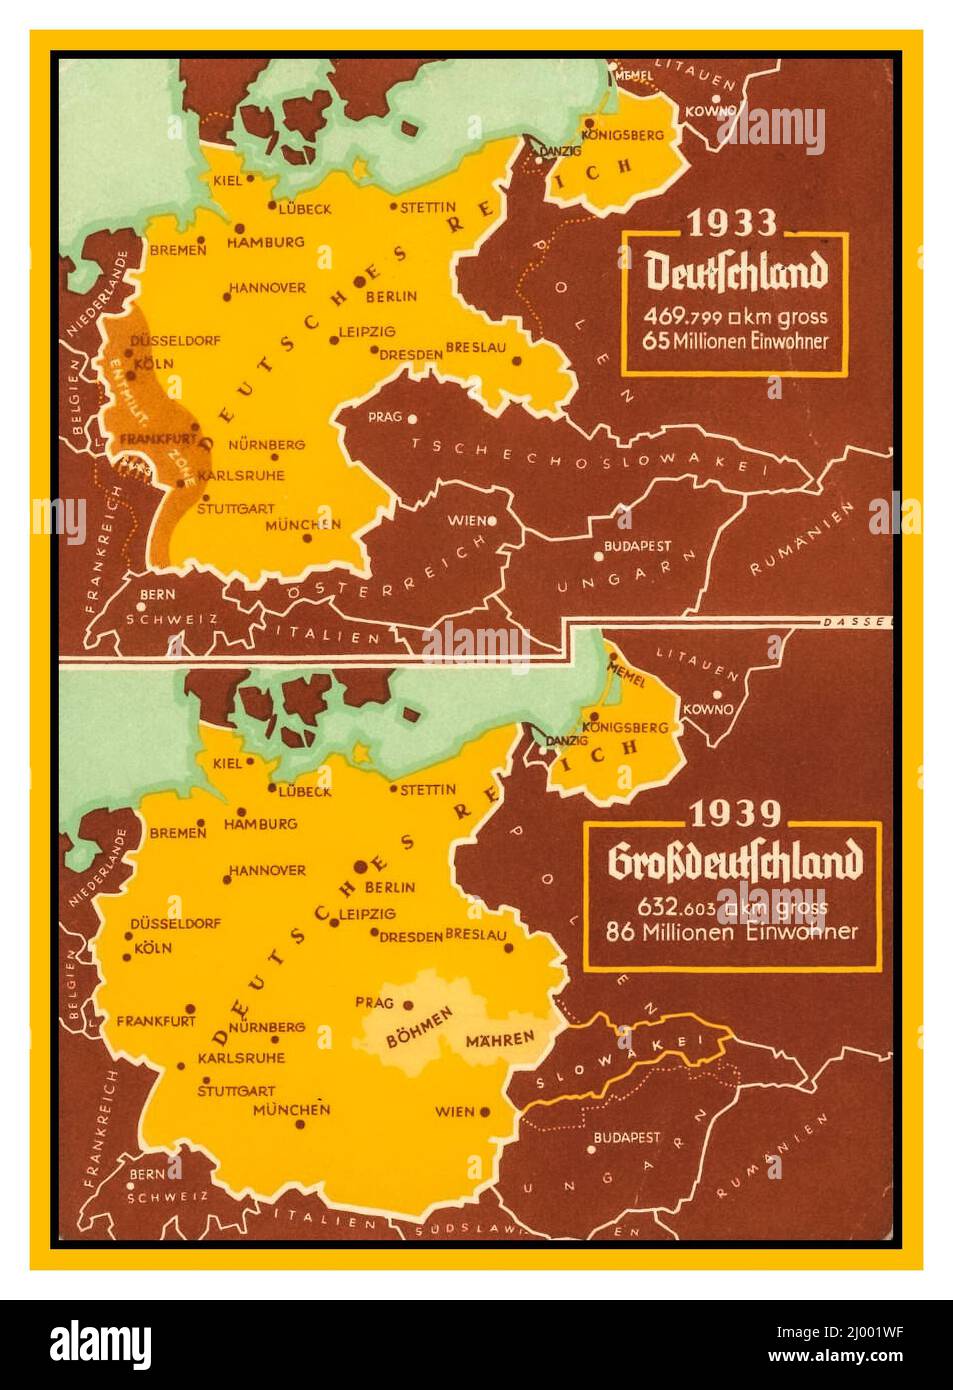 MAP Nazi Germany 1930s Vintage Nazi Propaganda Card Map illustrating (top) 1933 Germany and (bottom) 1939 Greater Germany, with the annexation of Austria and the occupation of Czechoslovakia  German Nazi Reich 1939 under Adolf Hitler German Reich / Nazi Germany (1933-1945) Stock Photo